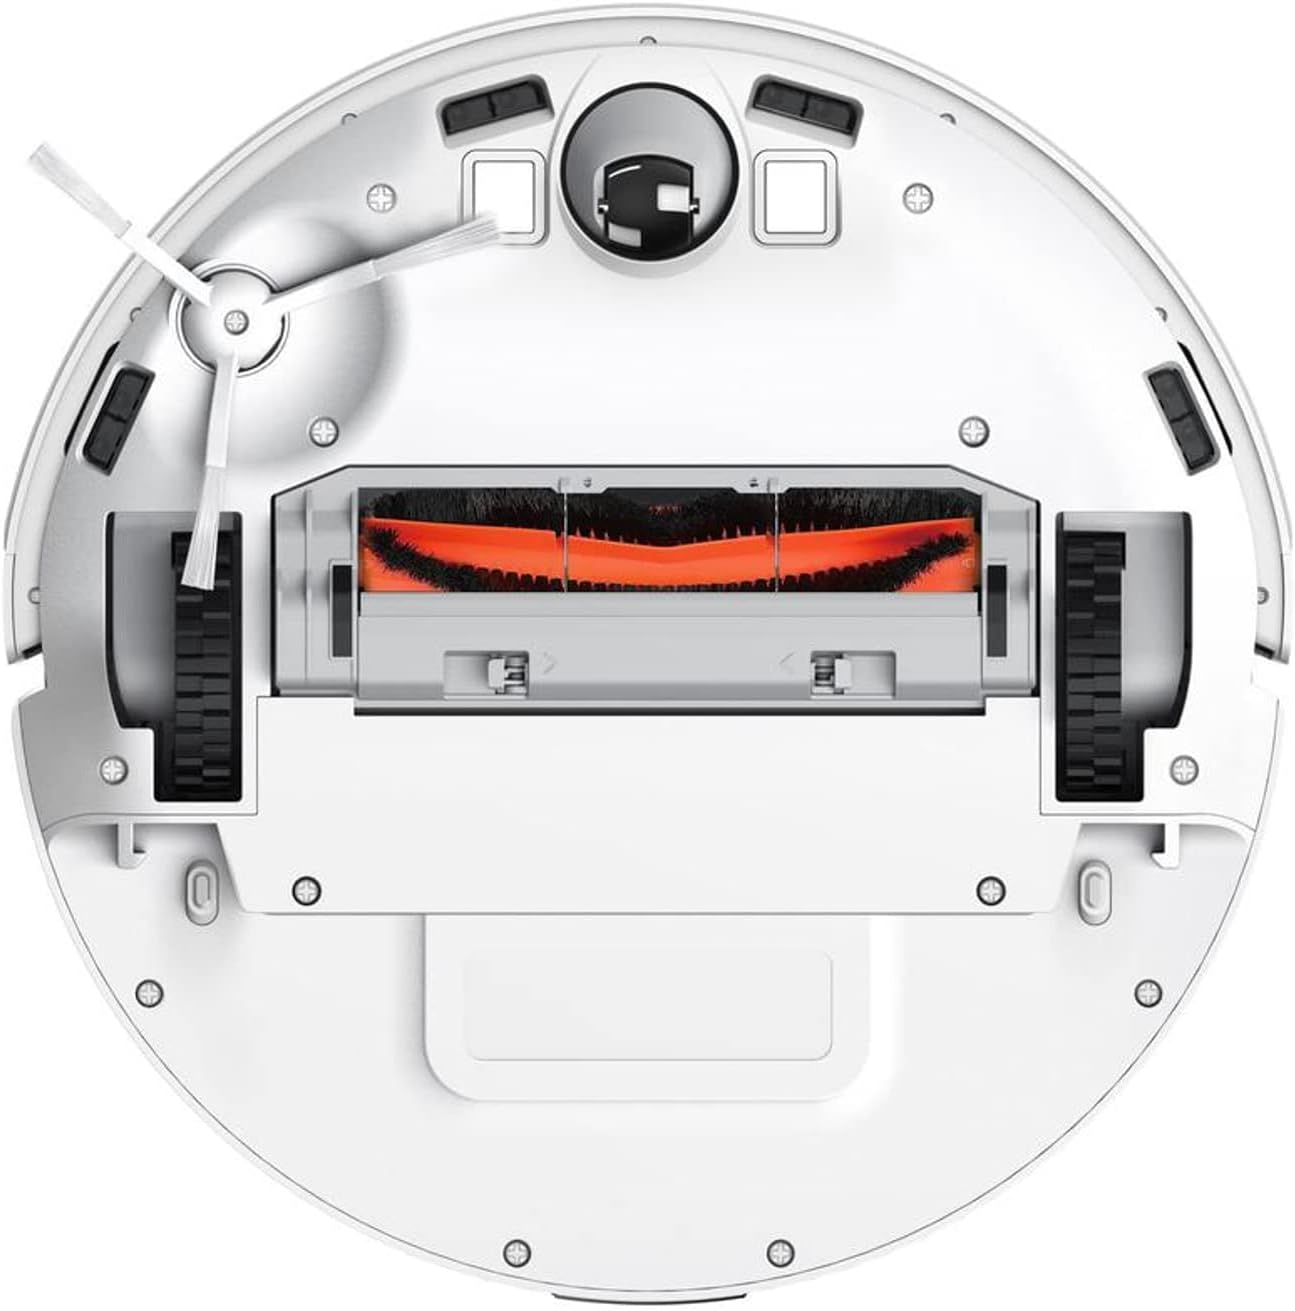 Xiaomi Mi Robot Vacuum-Mop 2 Lite A Real Cleaning Master With Excellent Vision,Gyroscope & Visual-Aided Navigation, 2,200 Pa Powerful Suction With 450 Ml Large-Capacity DUStbin